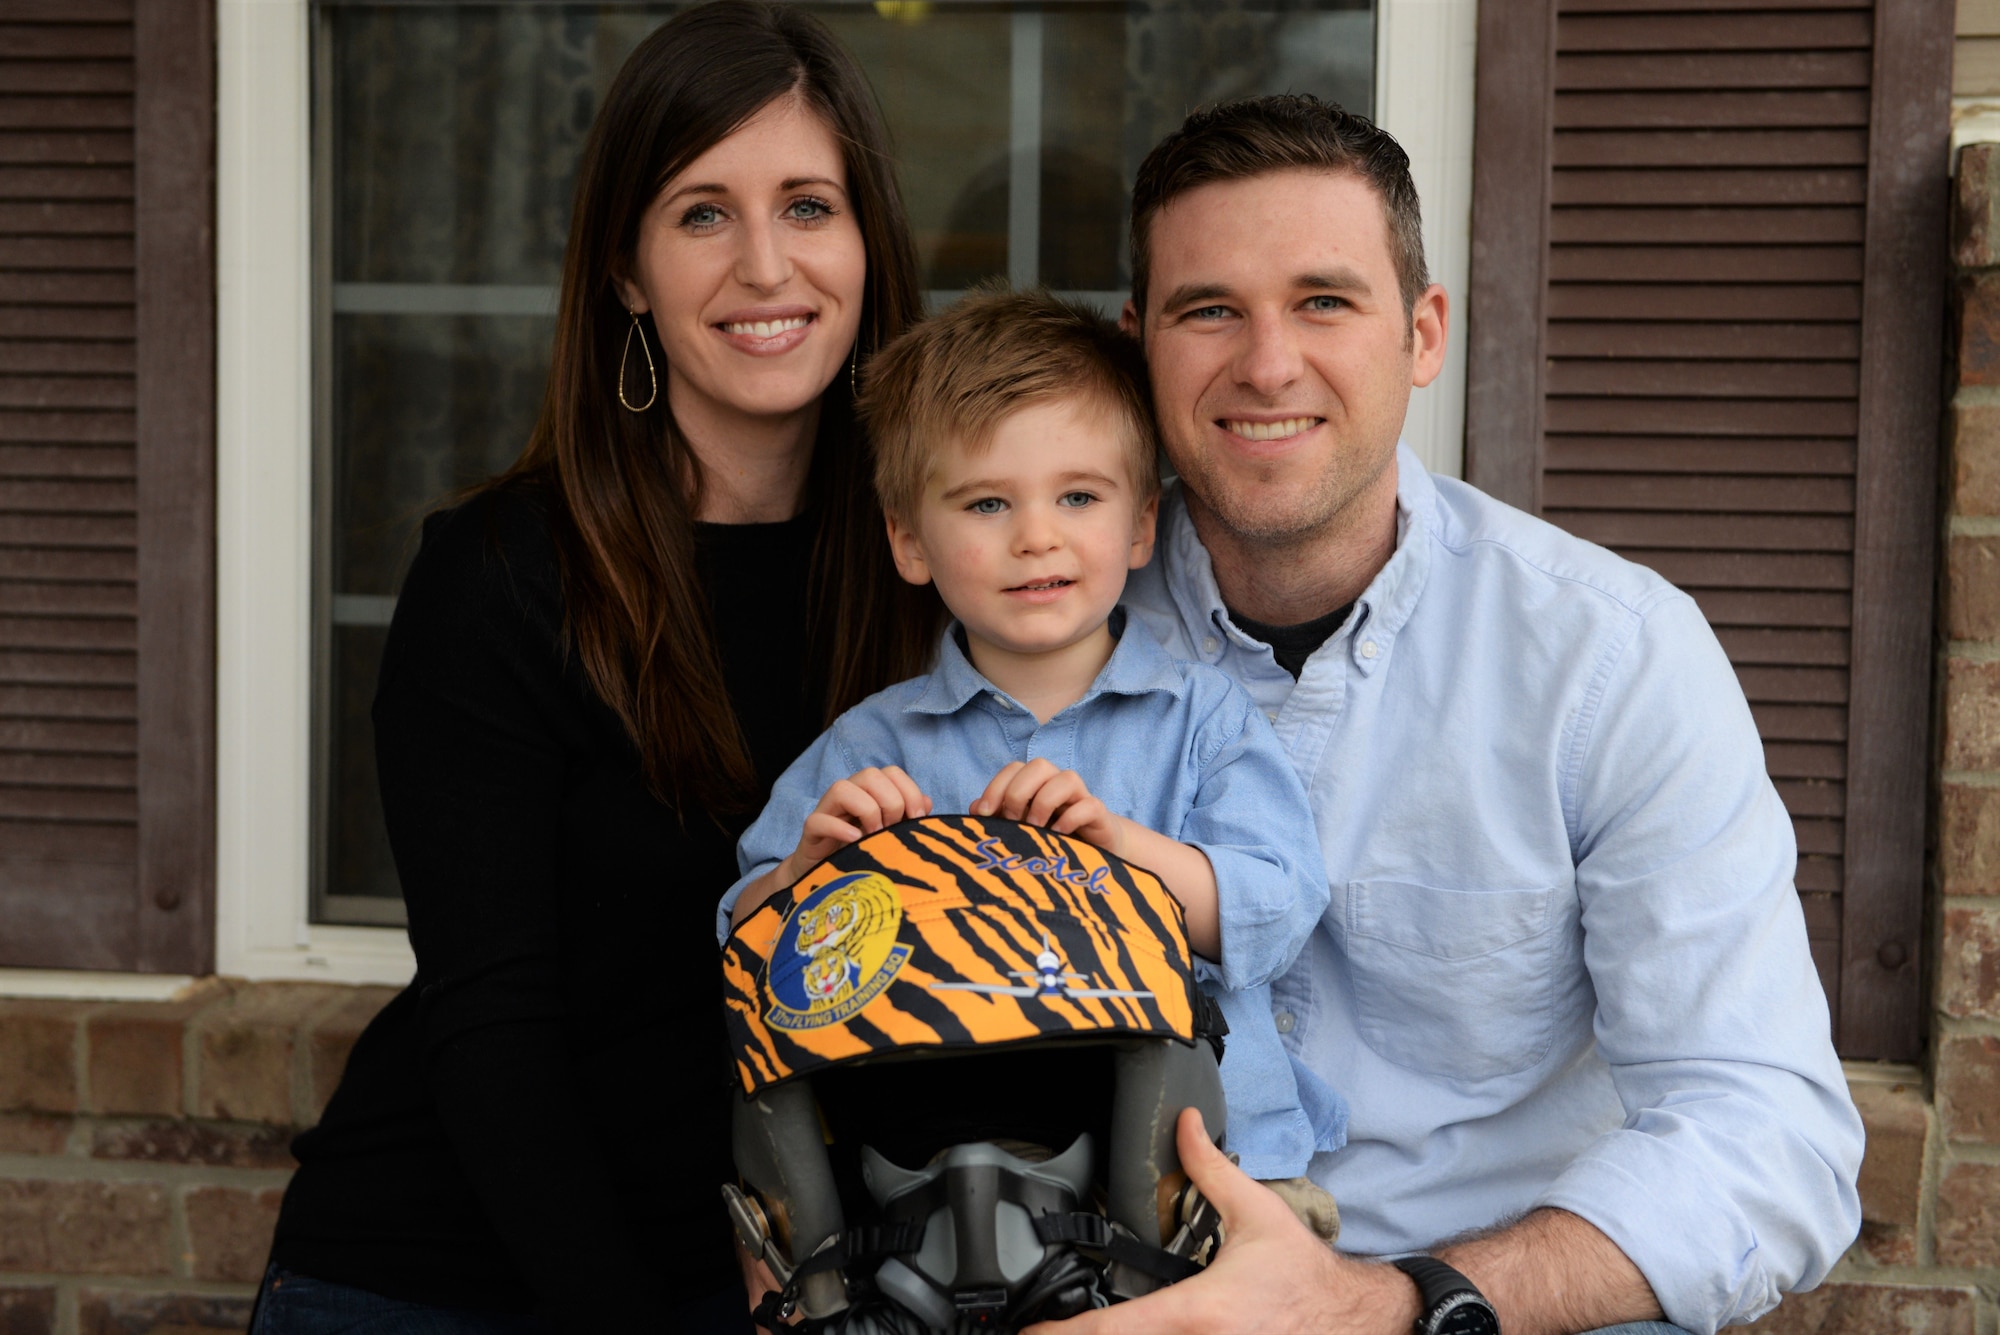 Capt. Hunter Barnhill, a 37th Flying Training Squadron instructor pilot, sits with his wife, Crystal, and their 3-year-old son, Nowlan, Jan 28, 2018, on Columbus Air Force Base, Mississippi. Many friends and families from Columbus AFB gave artwork and memorabilia from the 37th FTS to show their support for their family through his brain surgery and recovery process. (U.S. Air Force photo by Airman 1st Class Keith Holcomb)